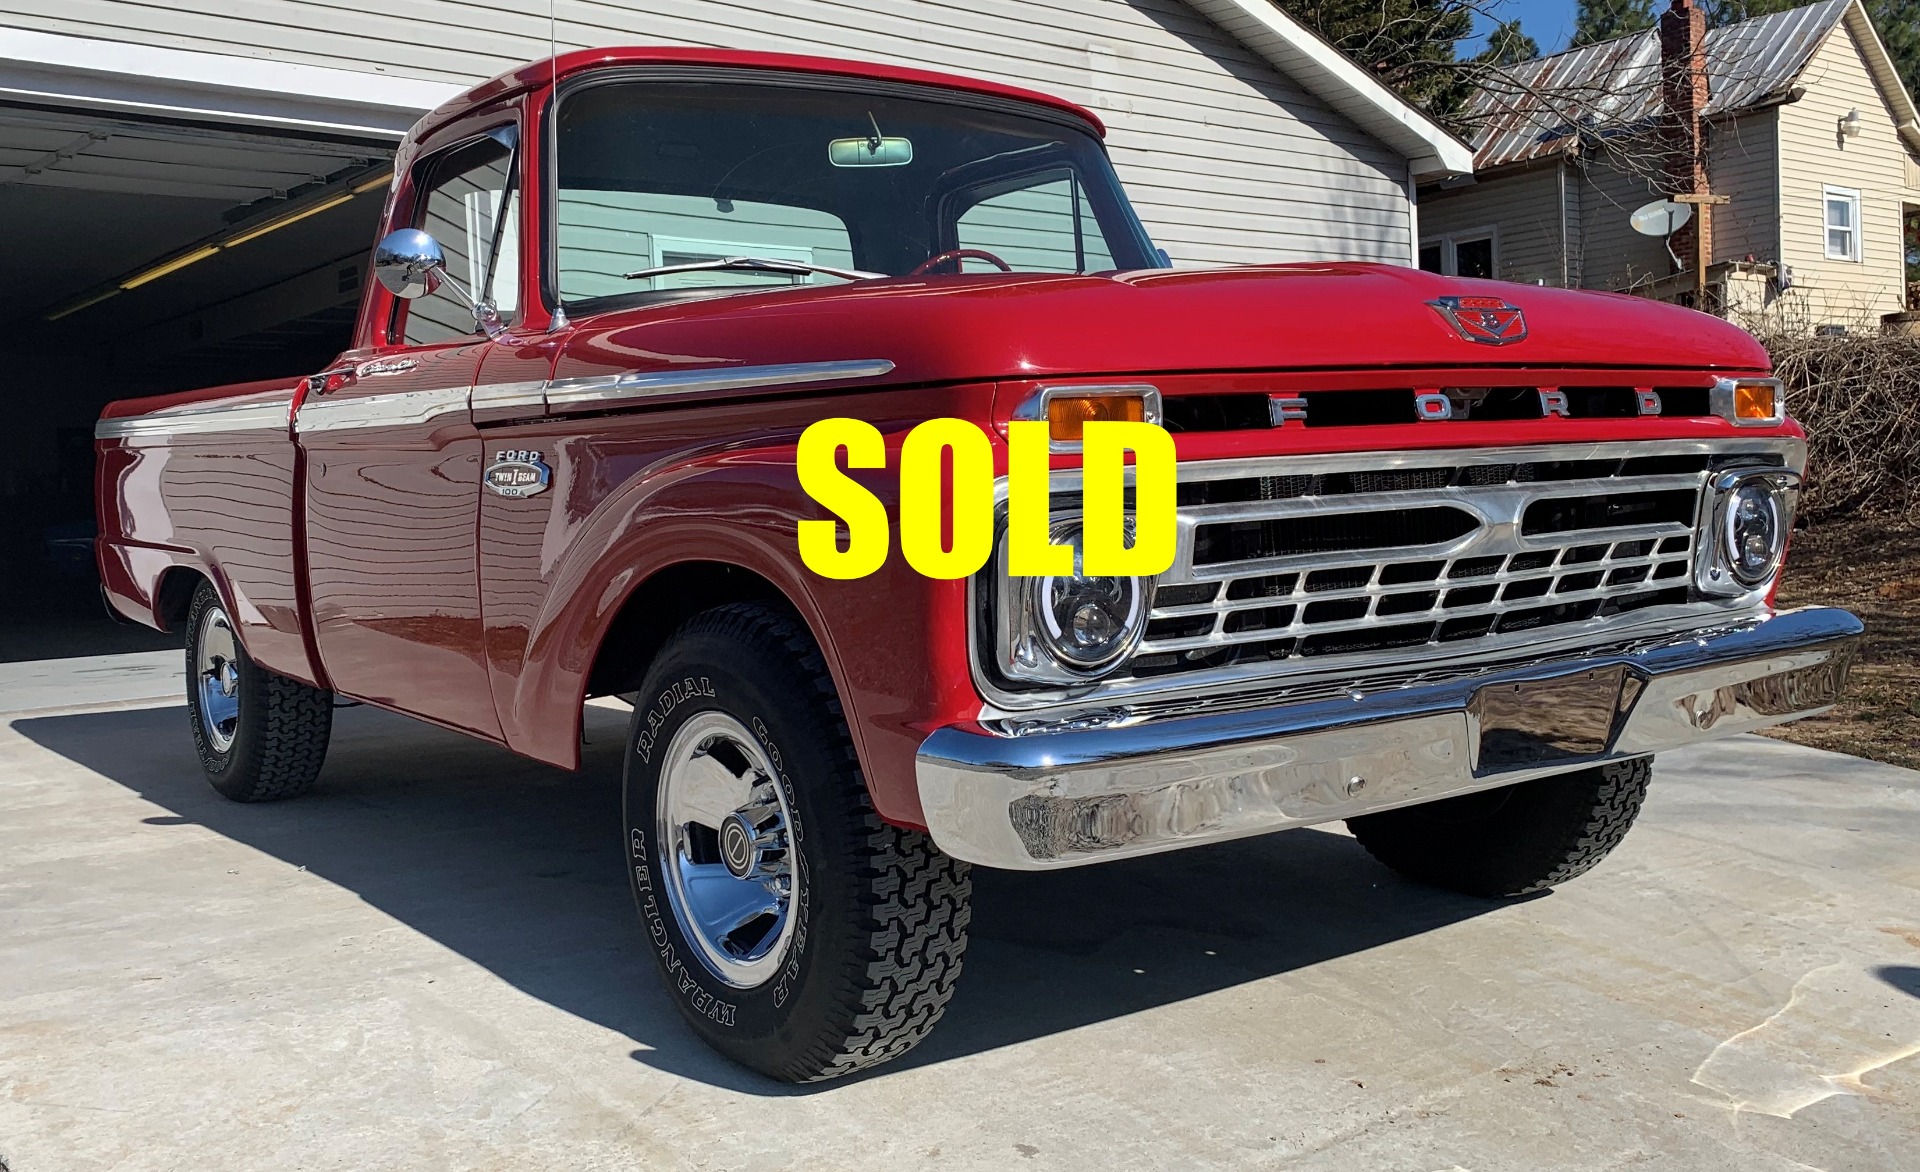 Used 1966 Ford F-100  199 , For Sale $33500, Call Us: (704) 996-3735